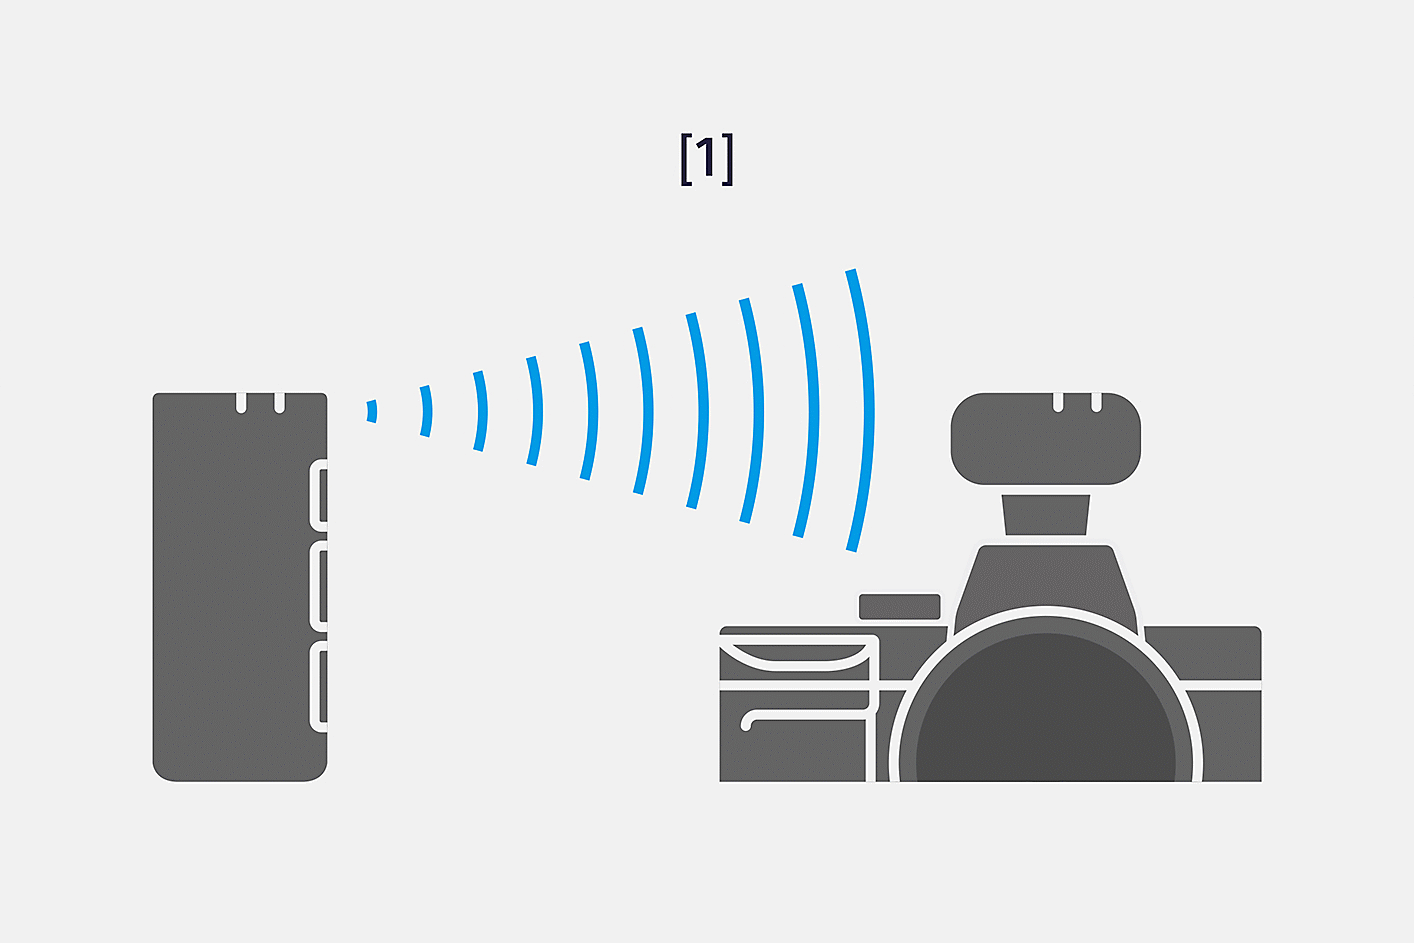 Illustration of the AptX Low Latency Bluetooth codec for wireless audio transmission